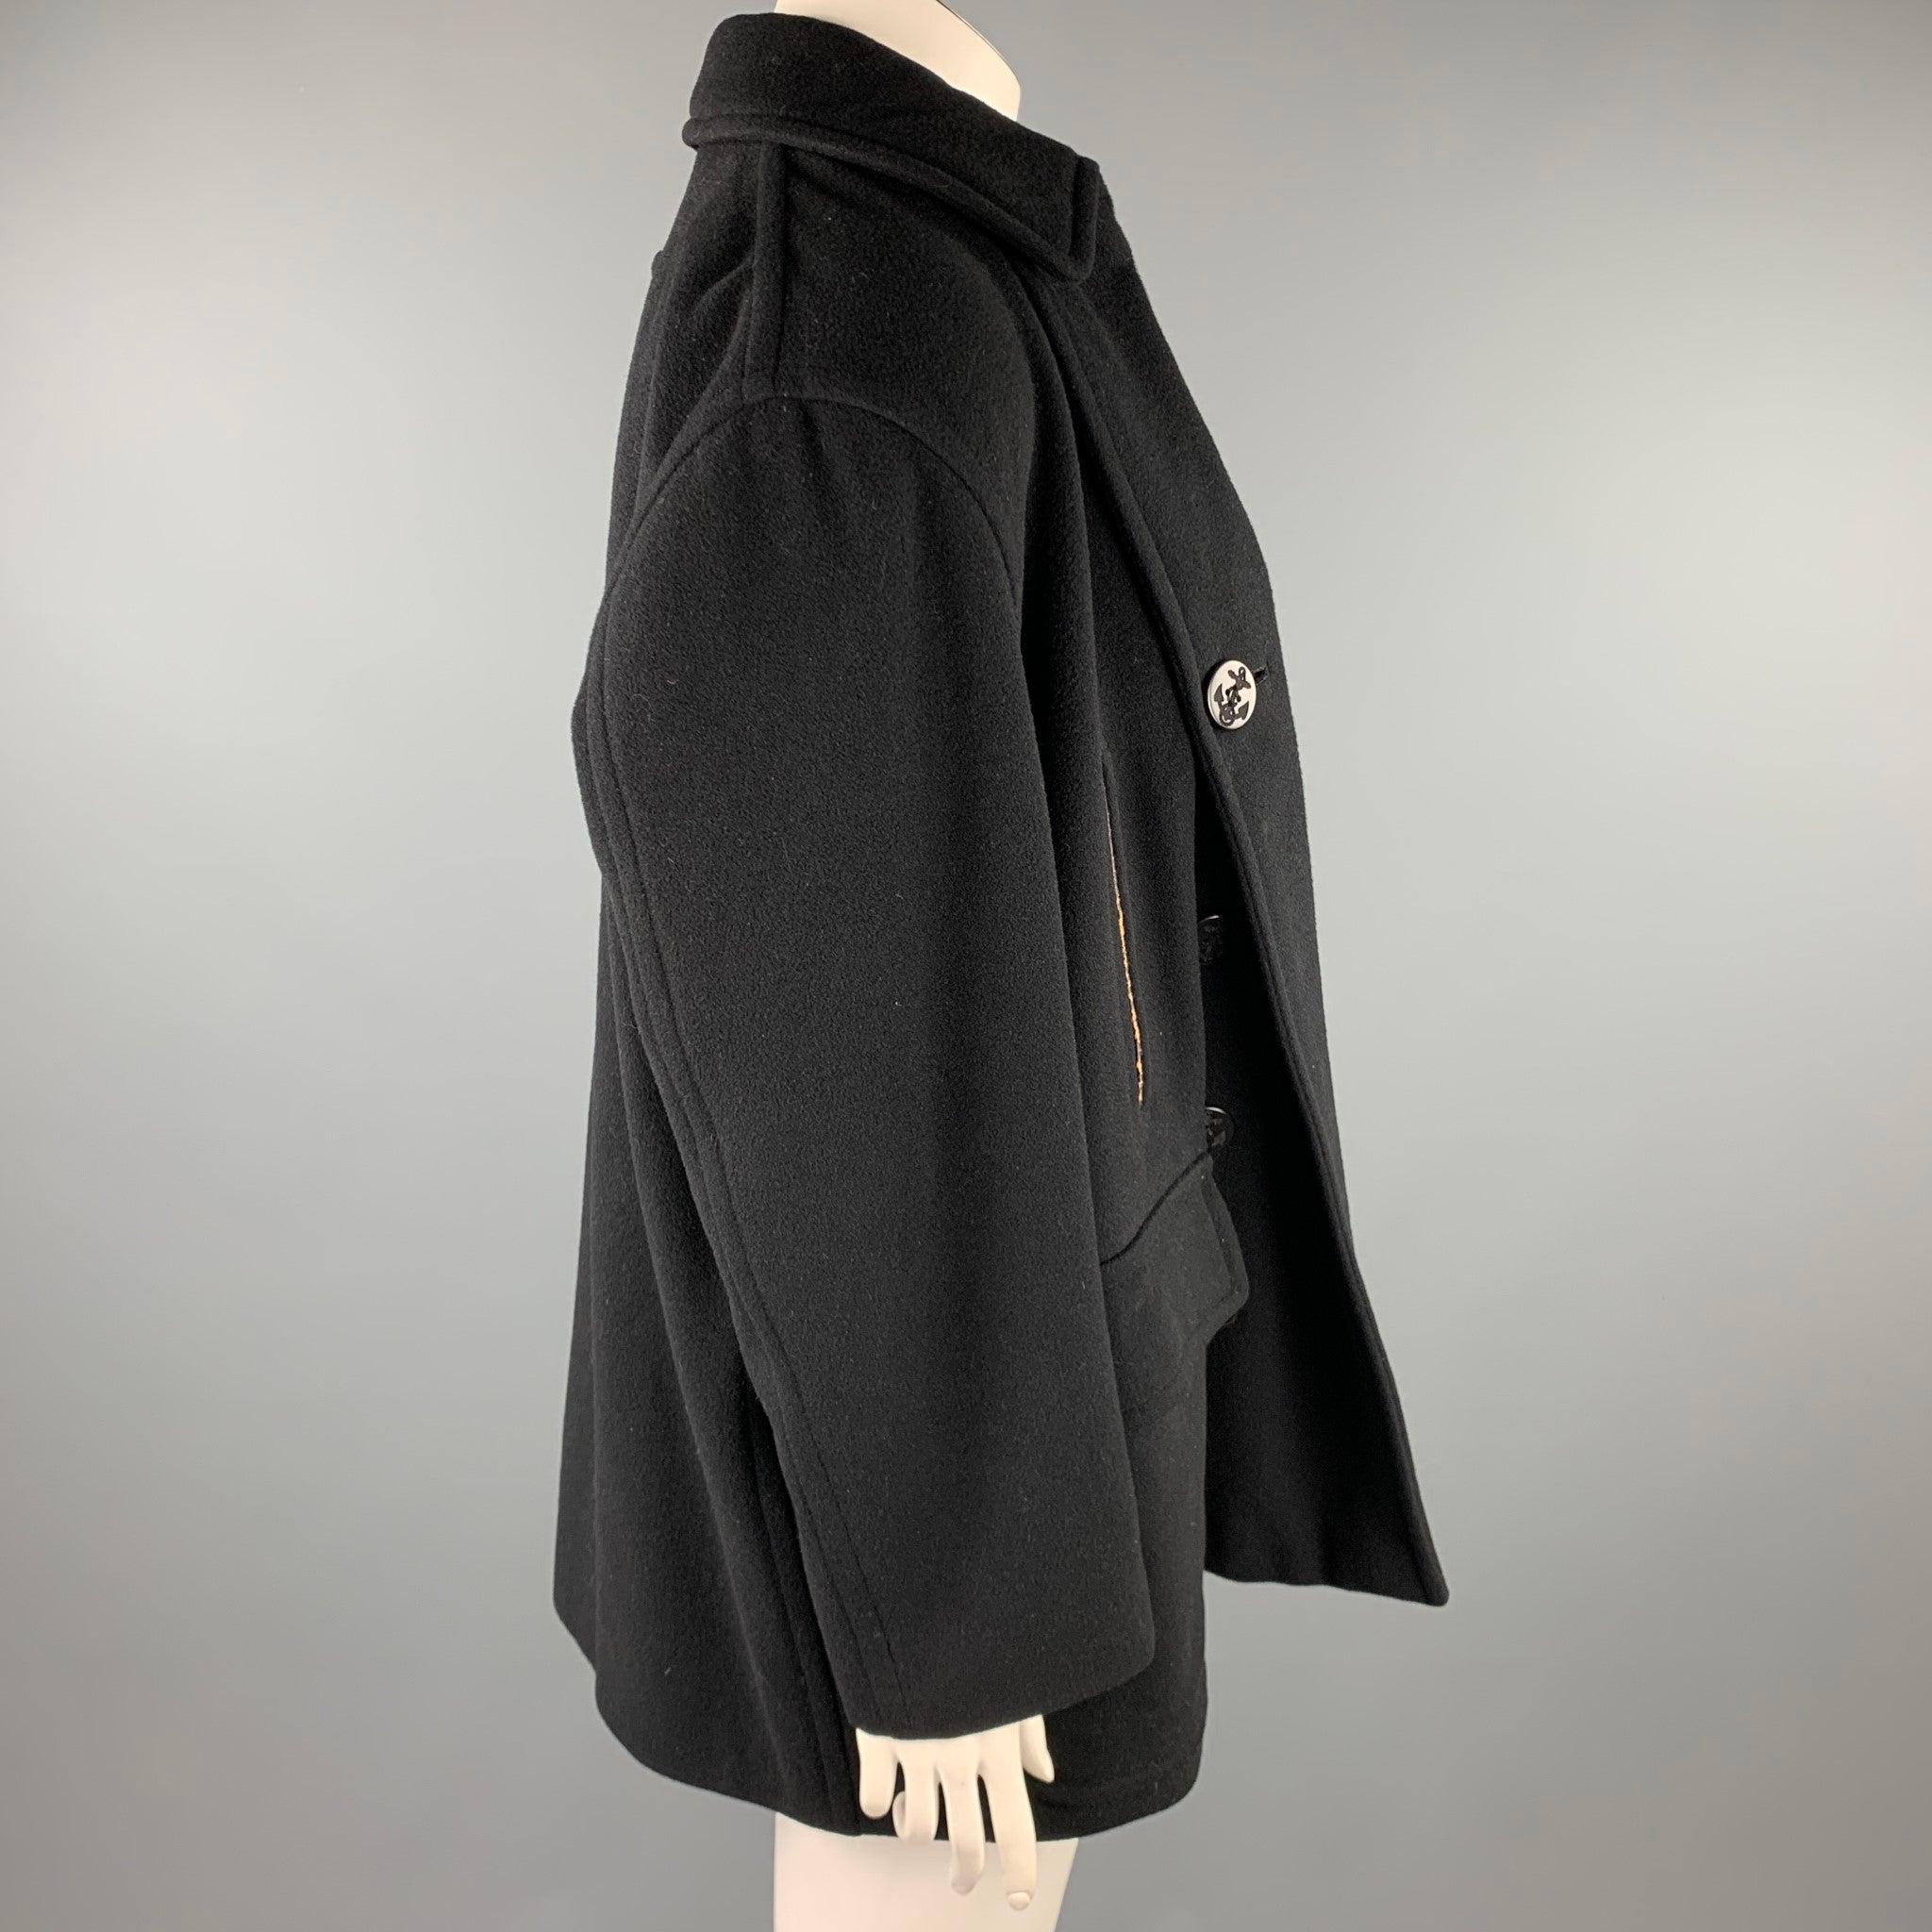 JEAN PAUL GAULTIER CLASSIQUE Size 10 Black Wool Blend Open Front Coat In Good Condition For Sale In San Francisco, CA